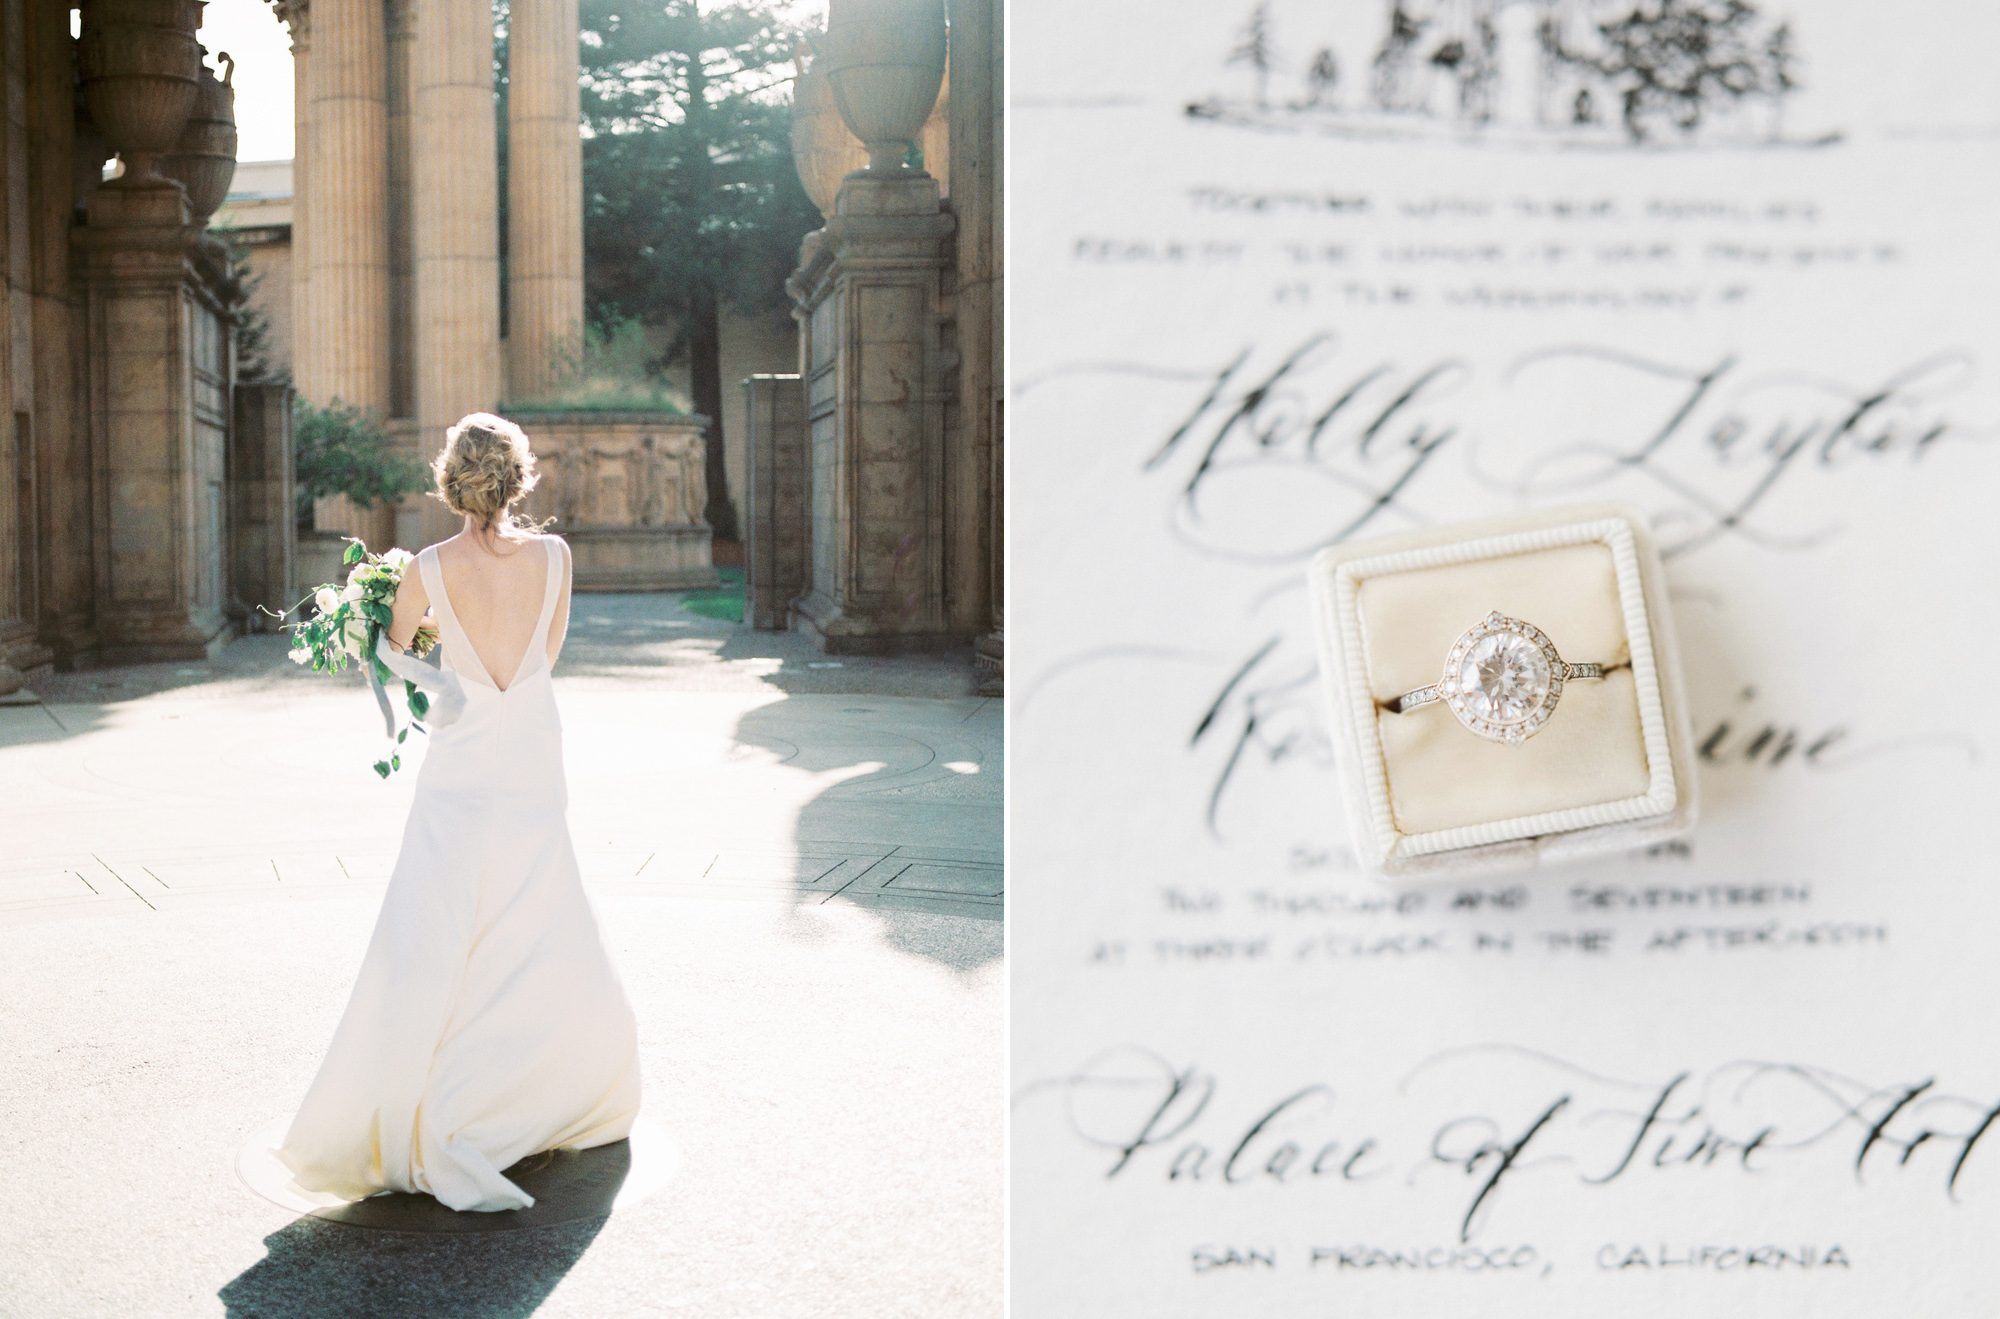 A diamond ring nestled in a Mrs Box are just some of the details from this San Francisco wedding.